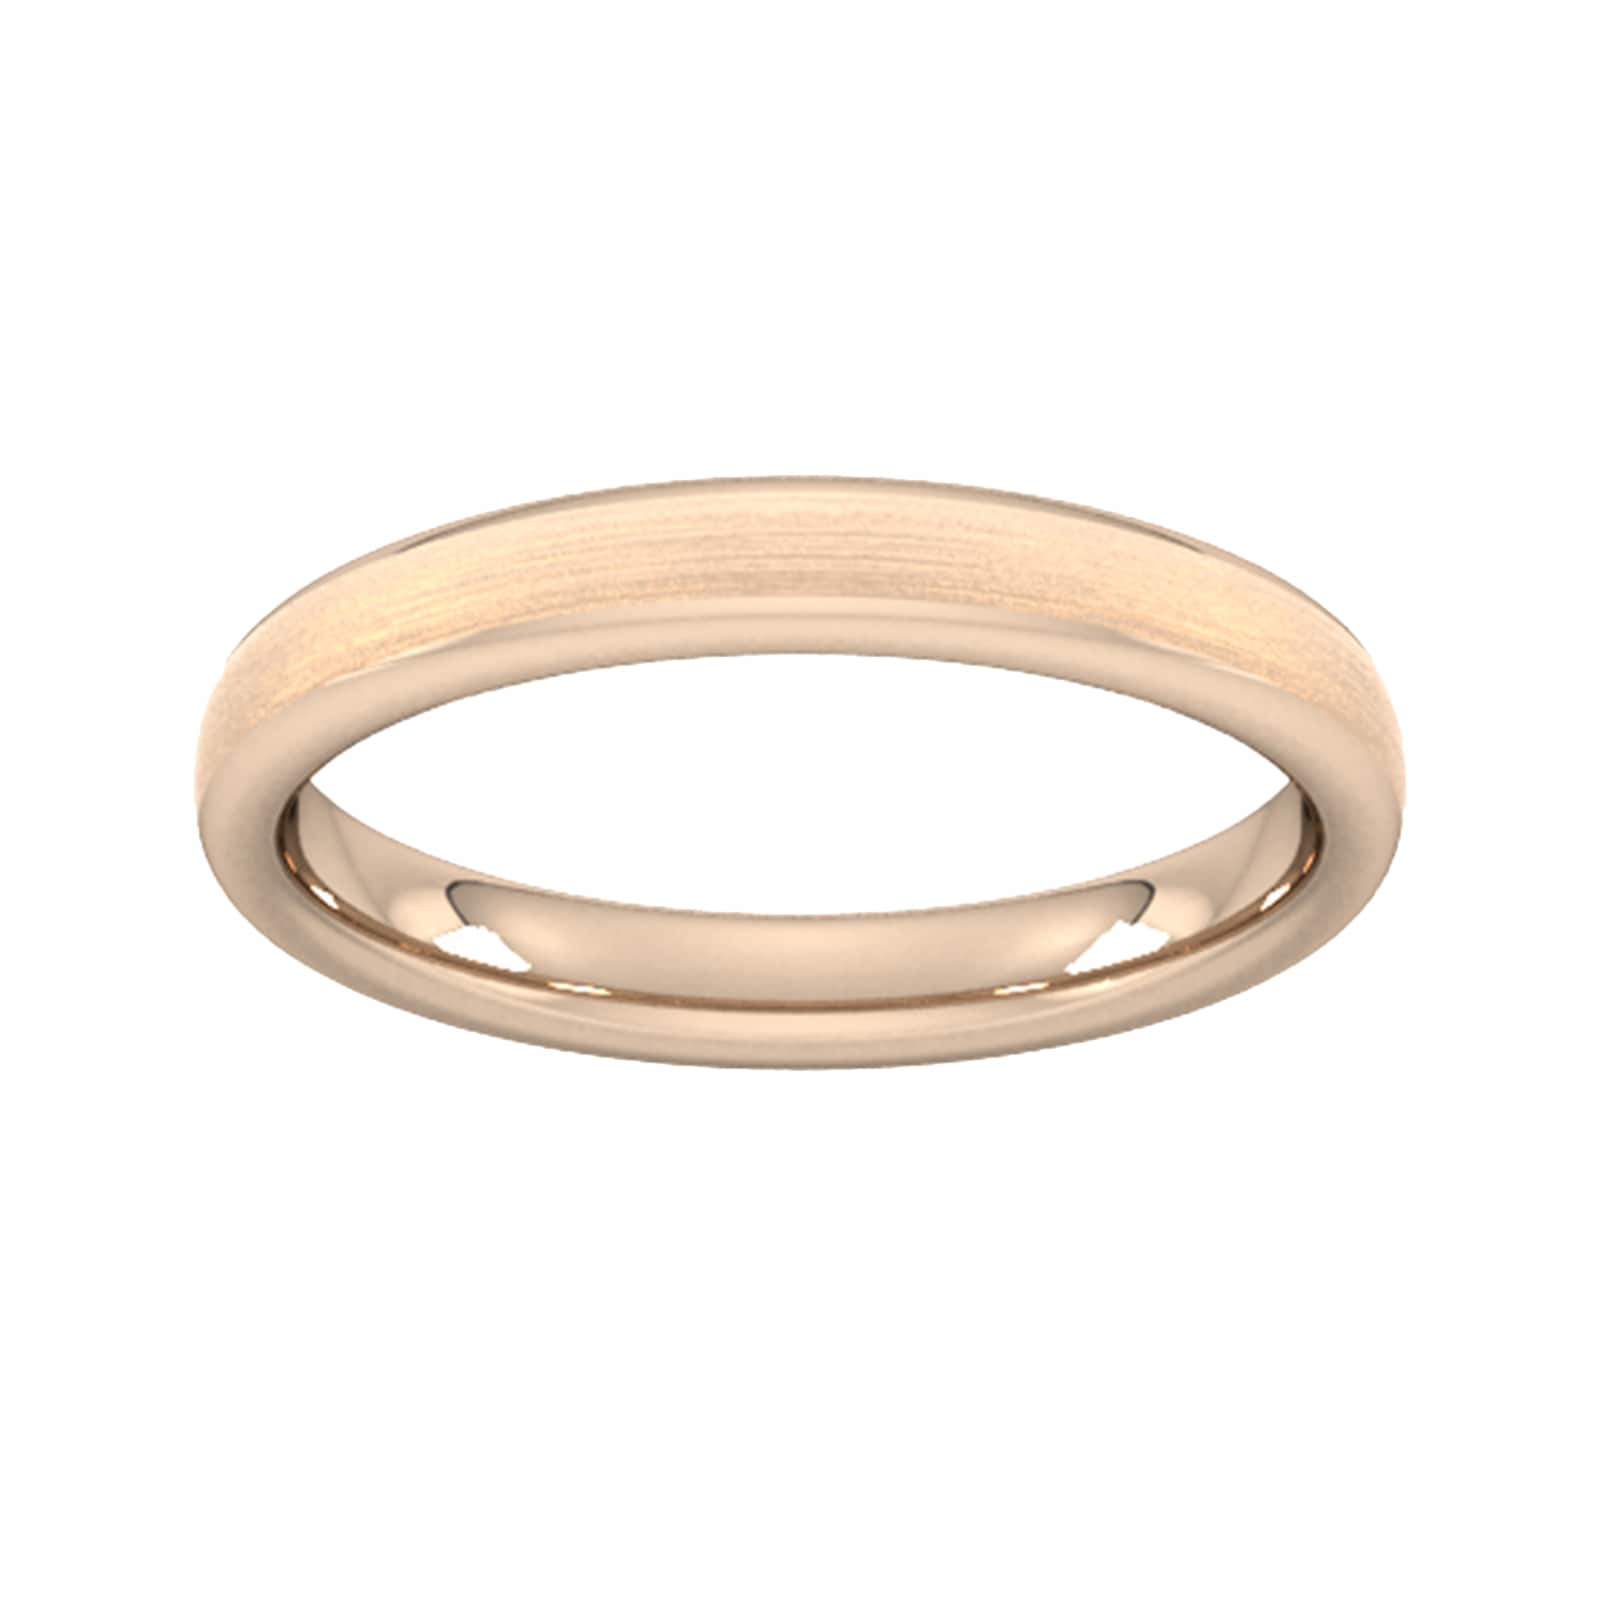 3mm D Shape Heavy Matt Finished Wedding Ring In 9 Carat Rose Gold - Ring Size O